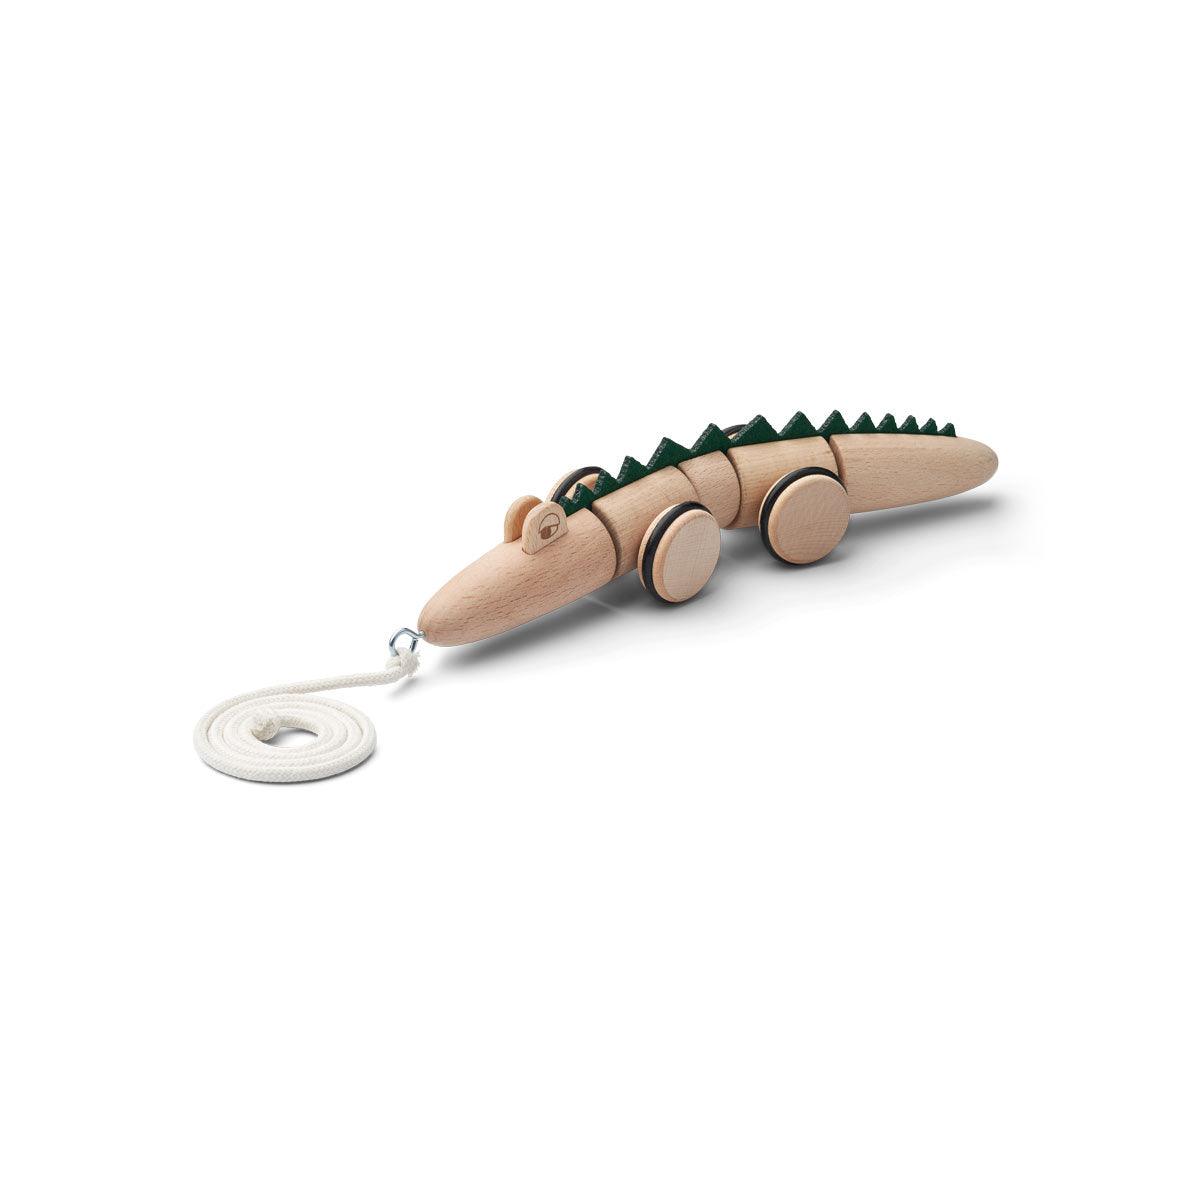 Alf & Co is a midlands based independent baby store and they are stockist of the Liewood Sidsel pull along crocodile 